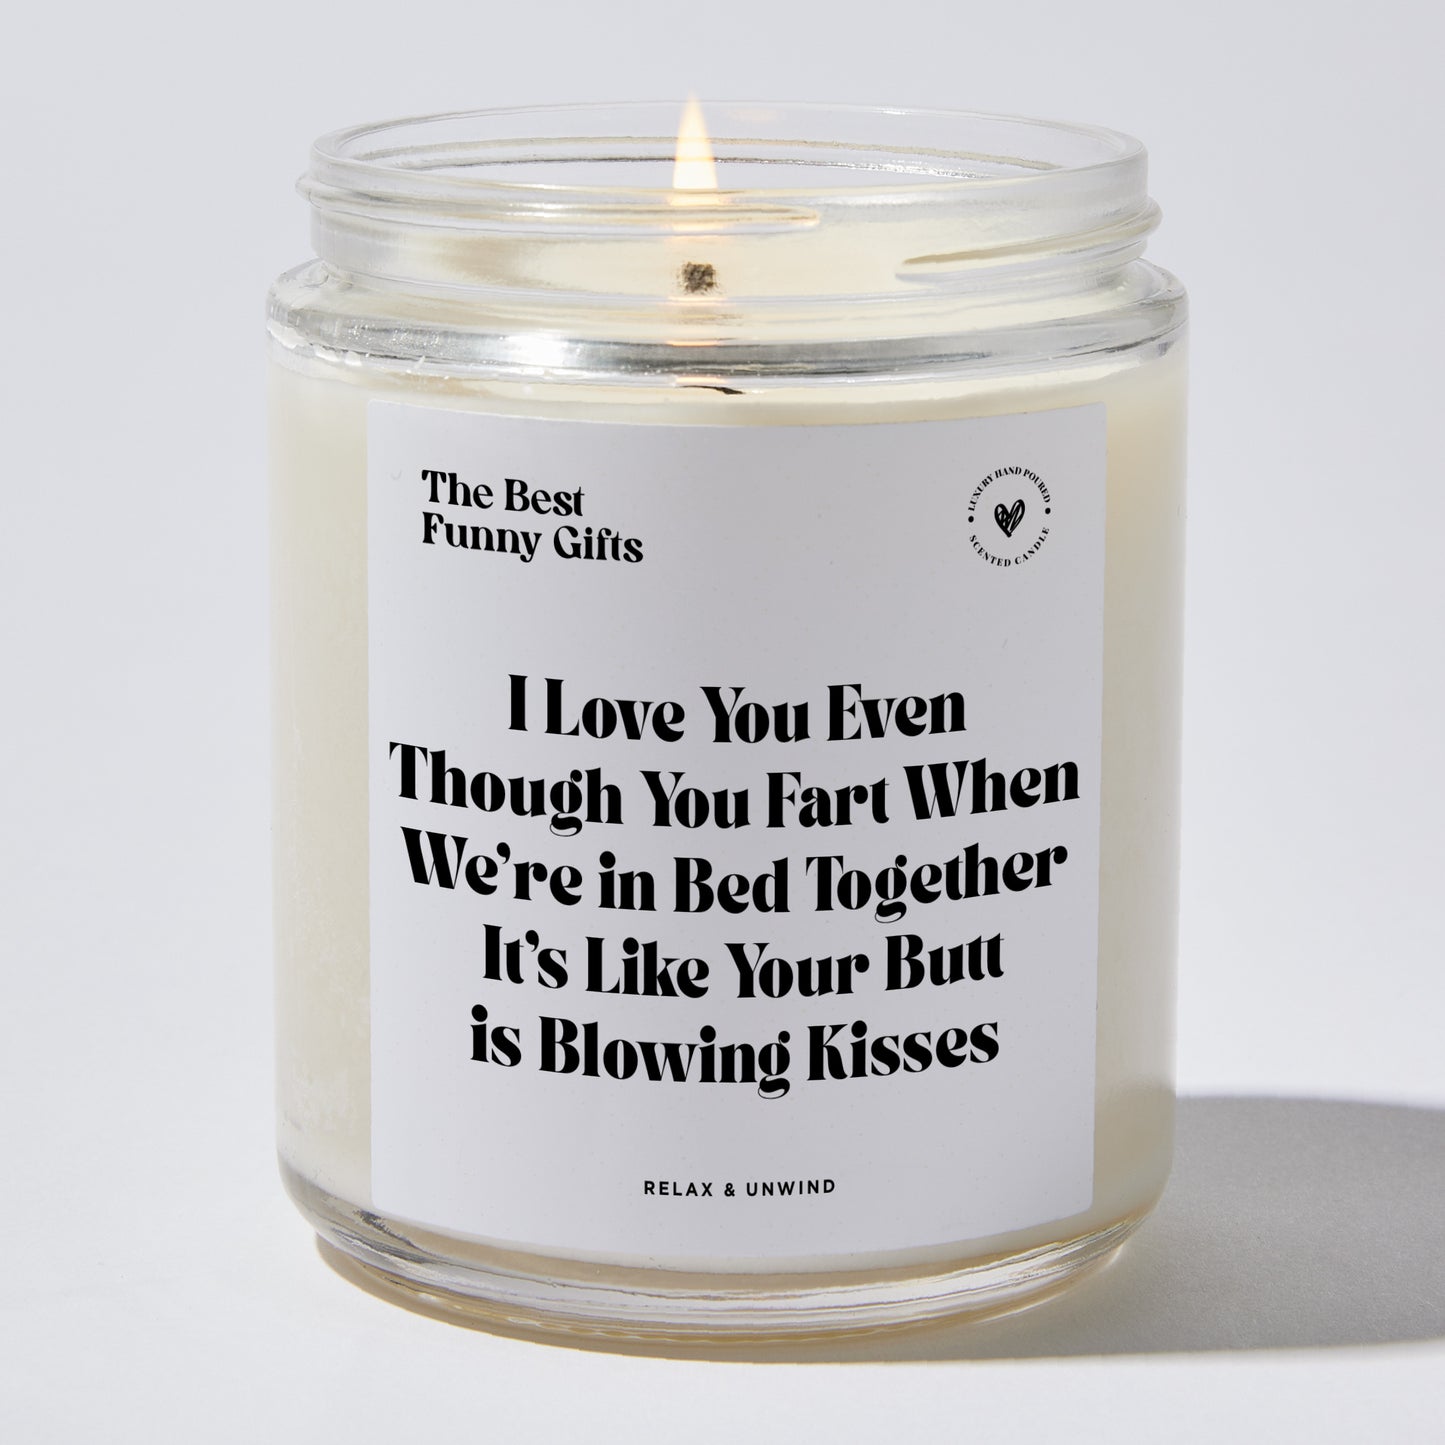 Anniversary Present - I Love You Even Though You Fart When We're in Bed Together. It's Like Your Butt is Blowing Kisses - Candle